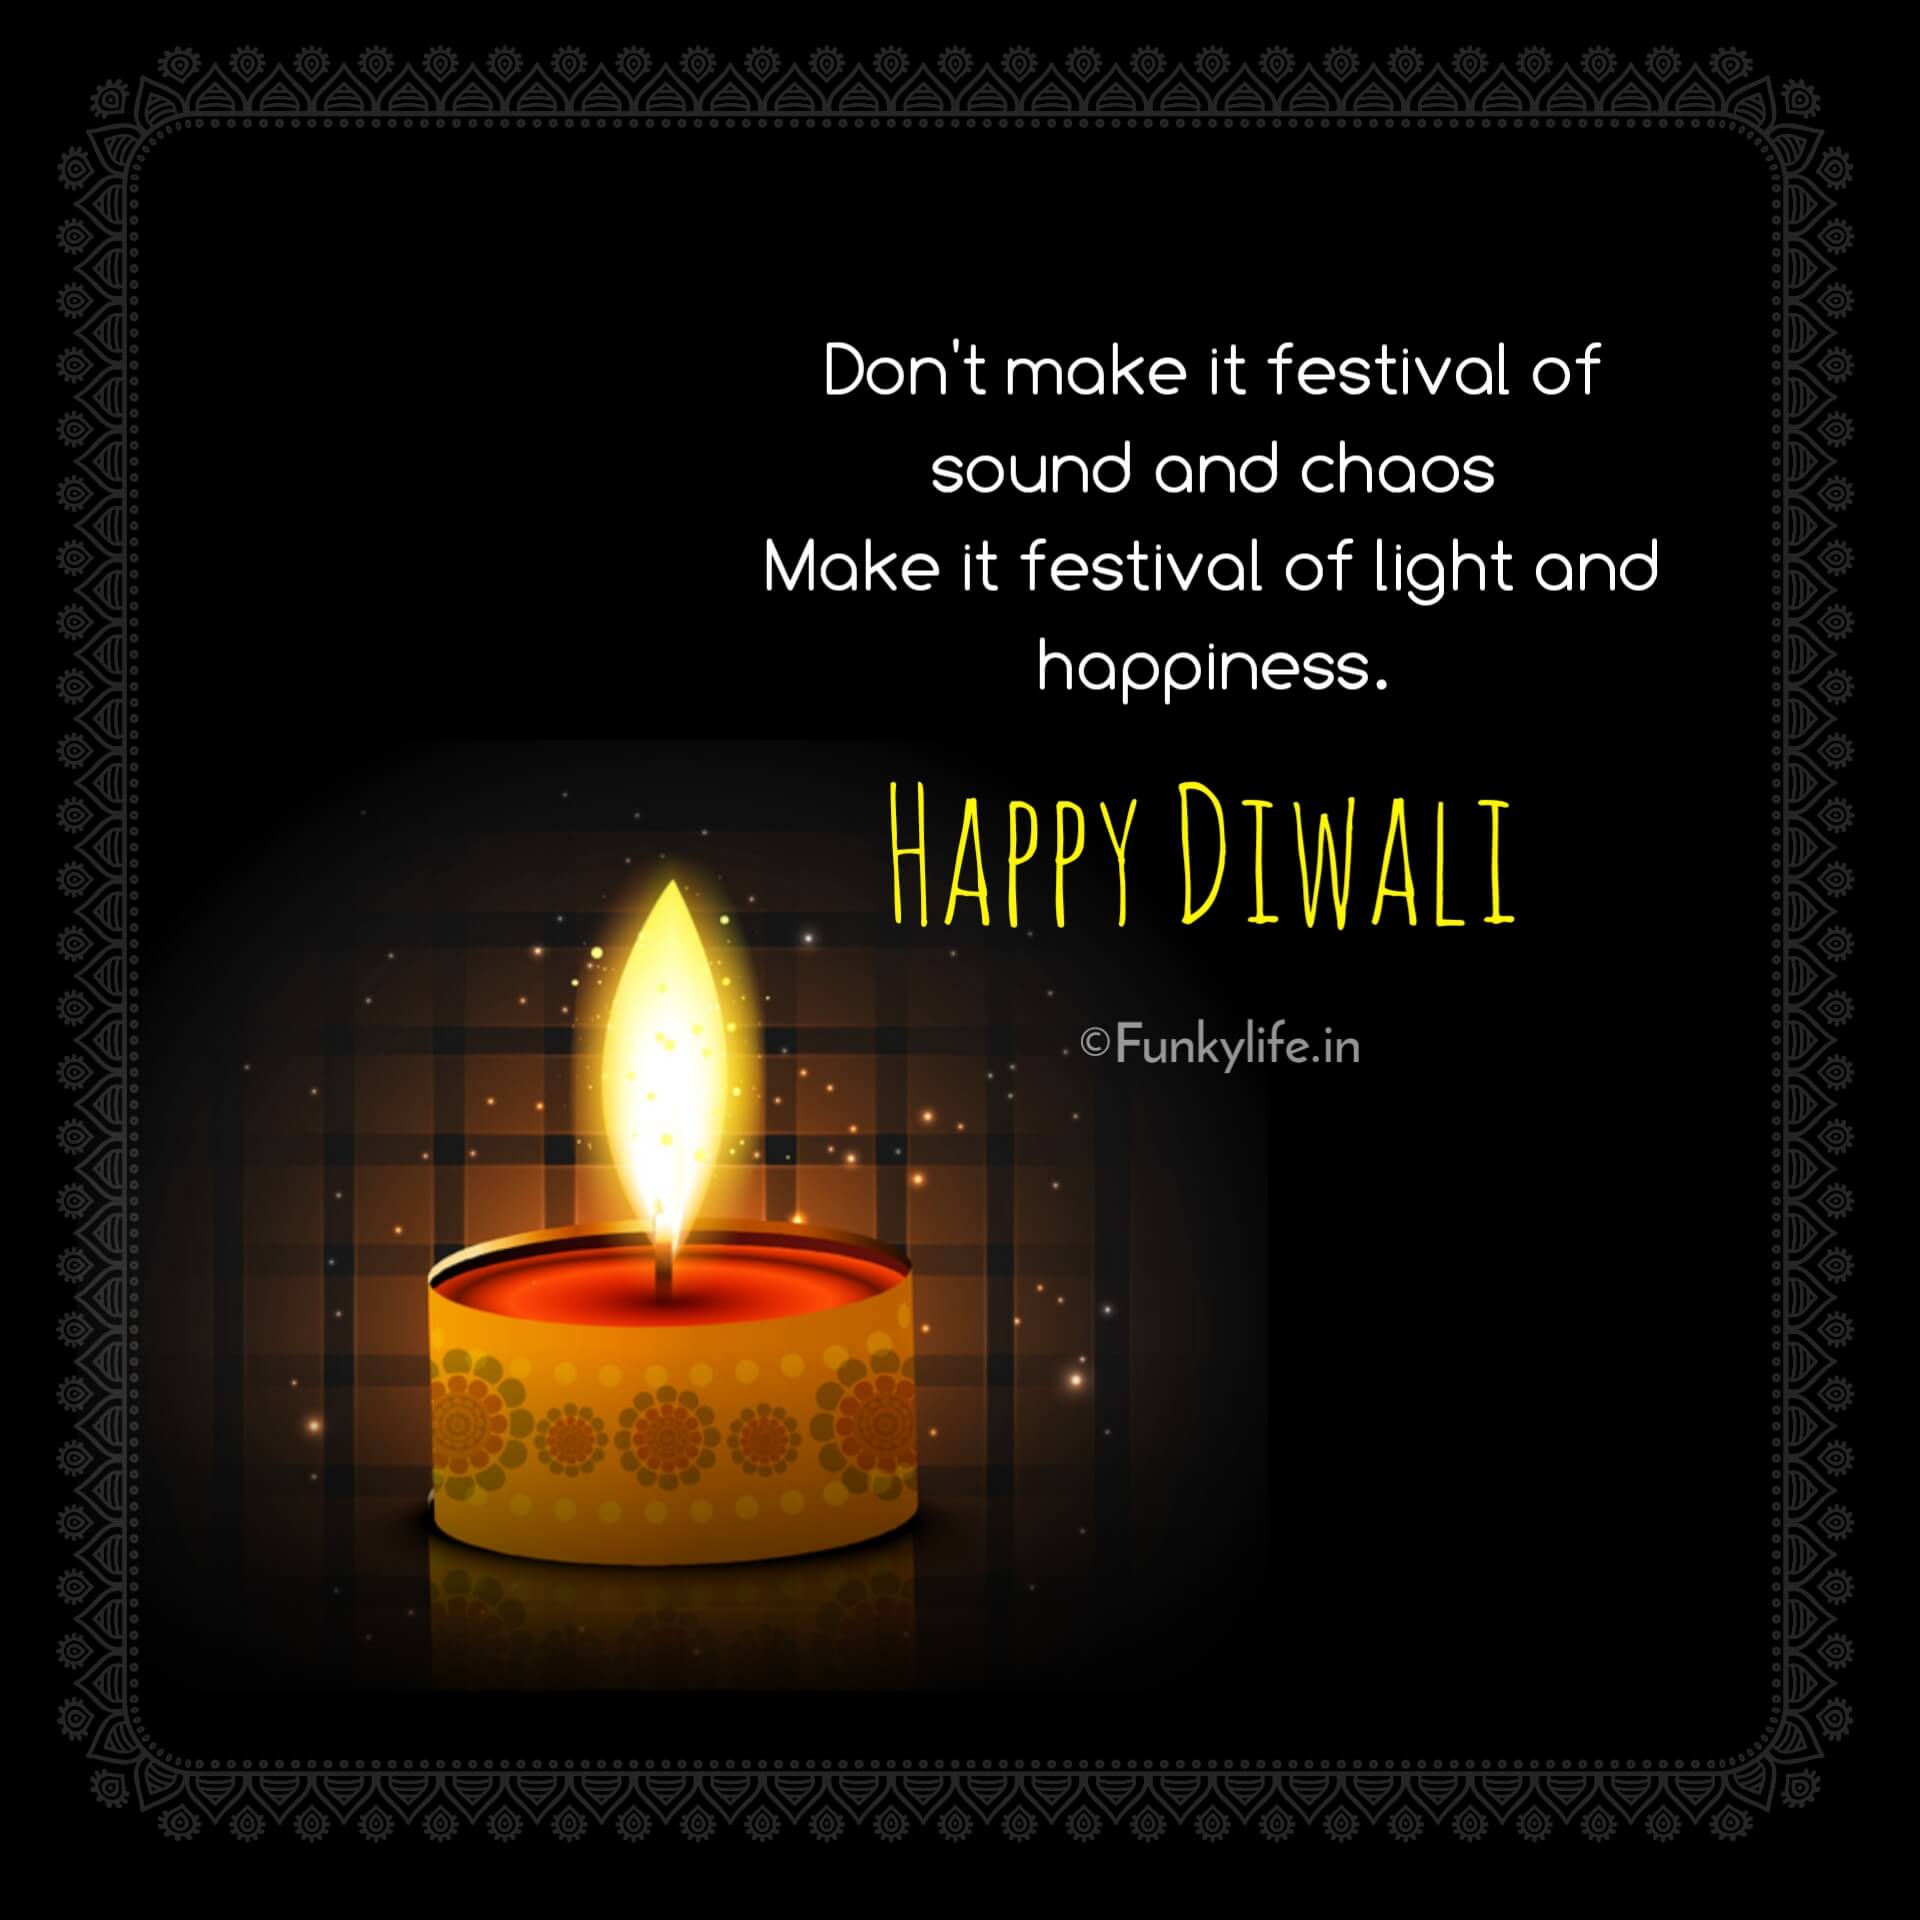 Diwali Images With Quotes